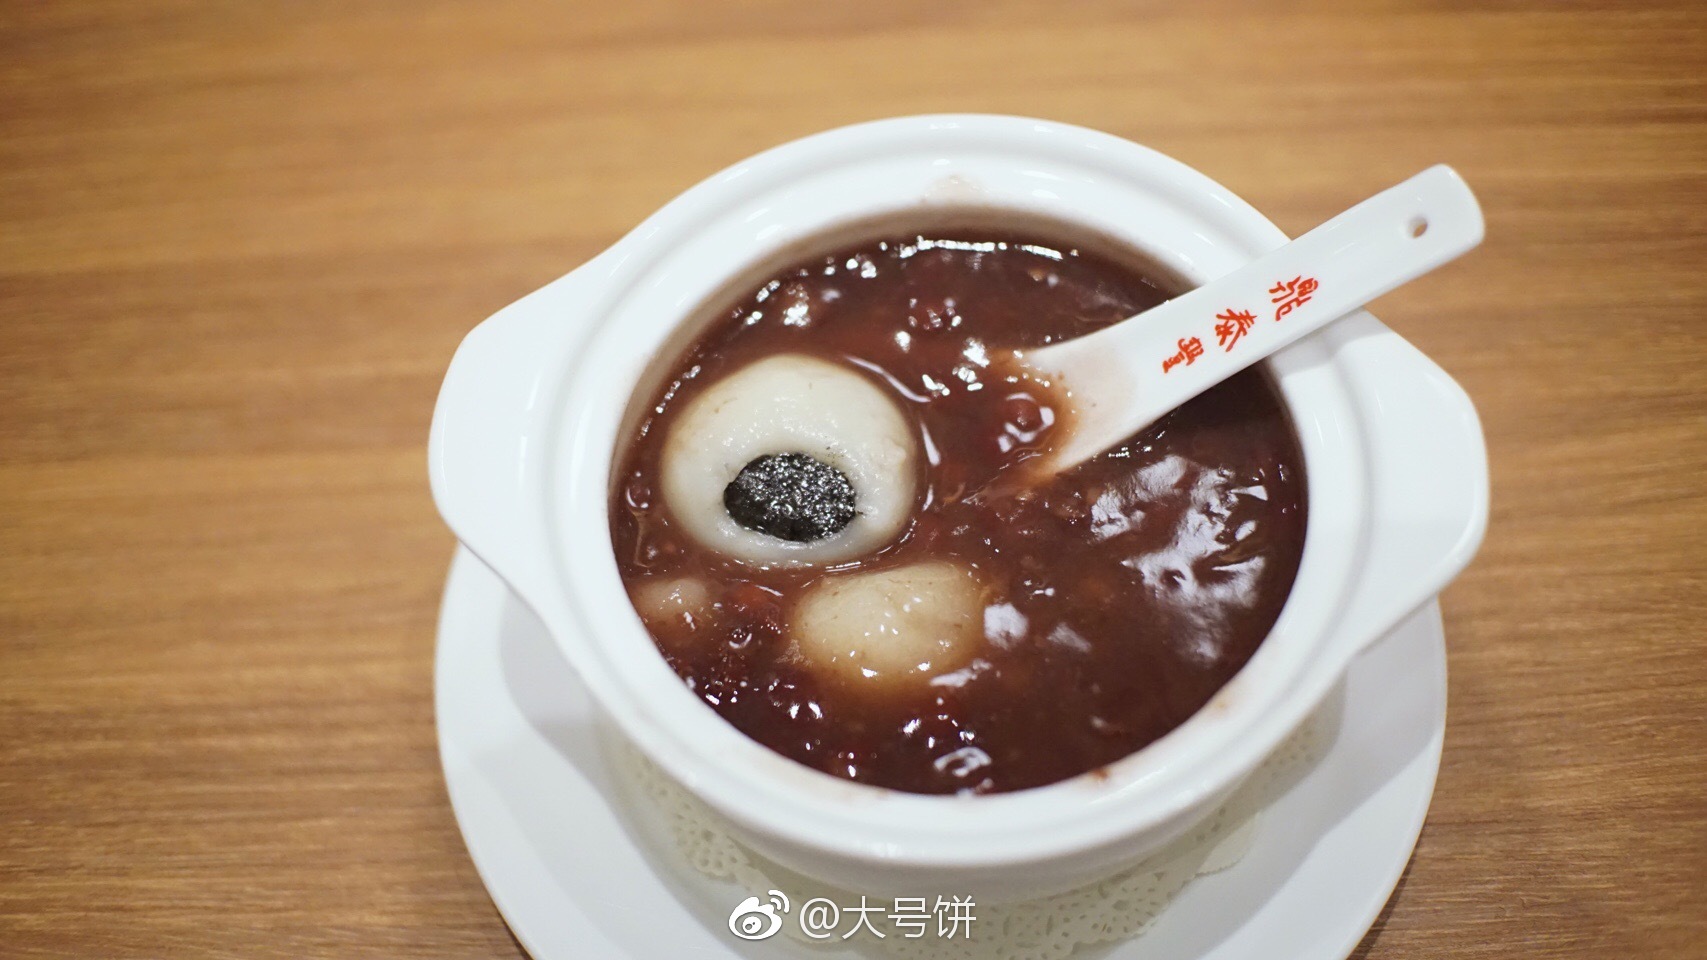 These Chinese desserts always hit the spot in terms of taste, comfort and nostalgia